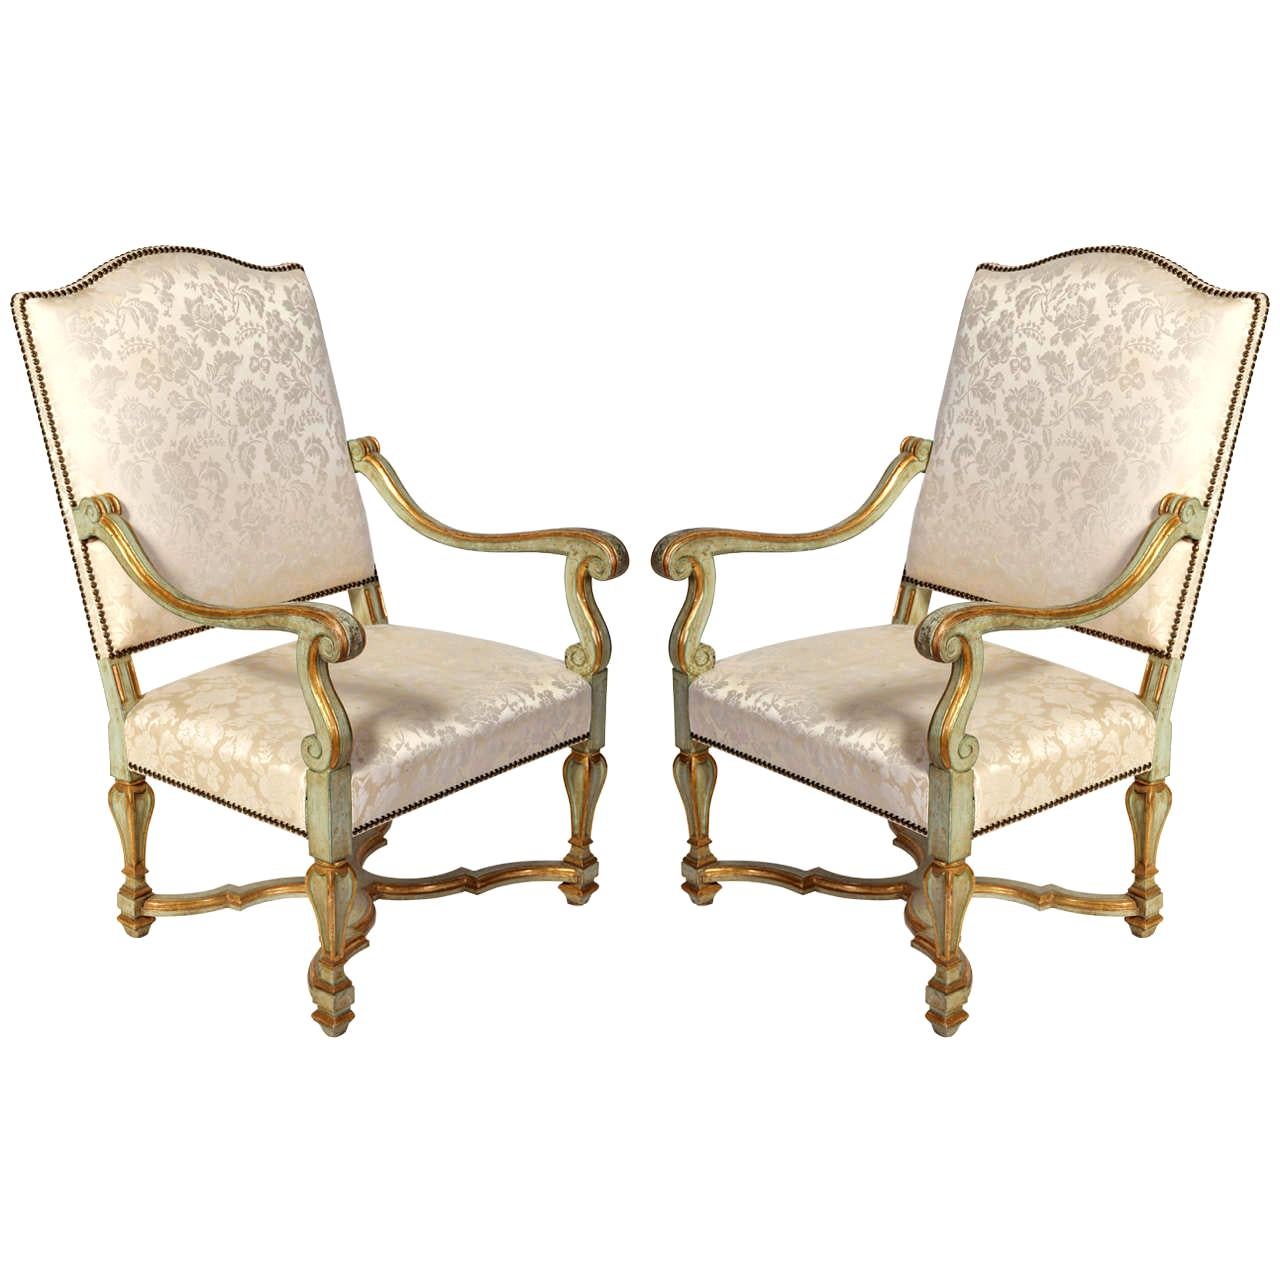 Pair of Italian Early 18th Century Painted Armchairs For Sale